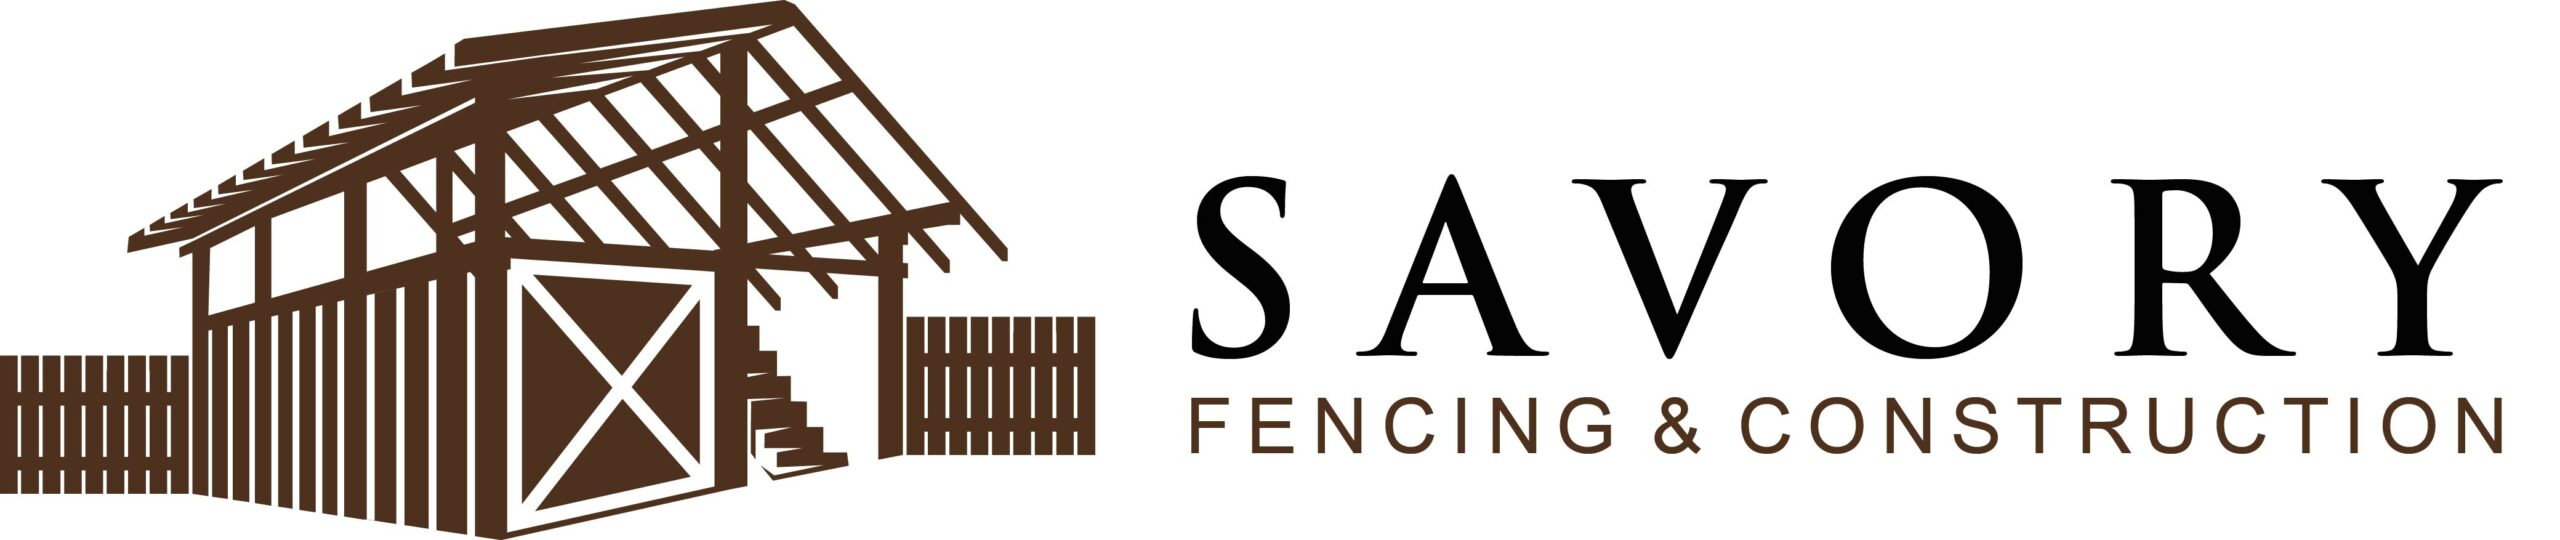 Savory Fencing & Construction